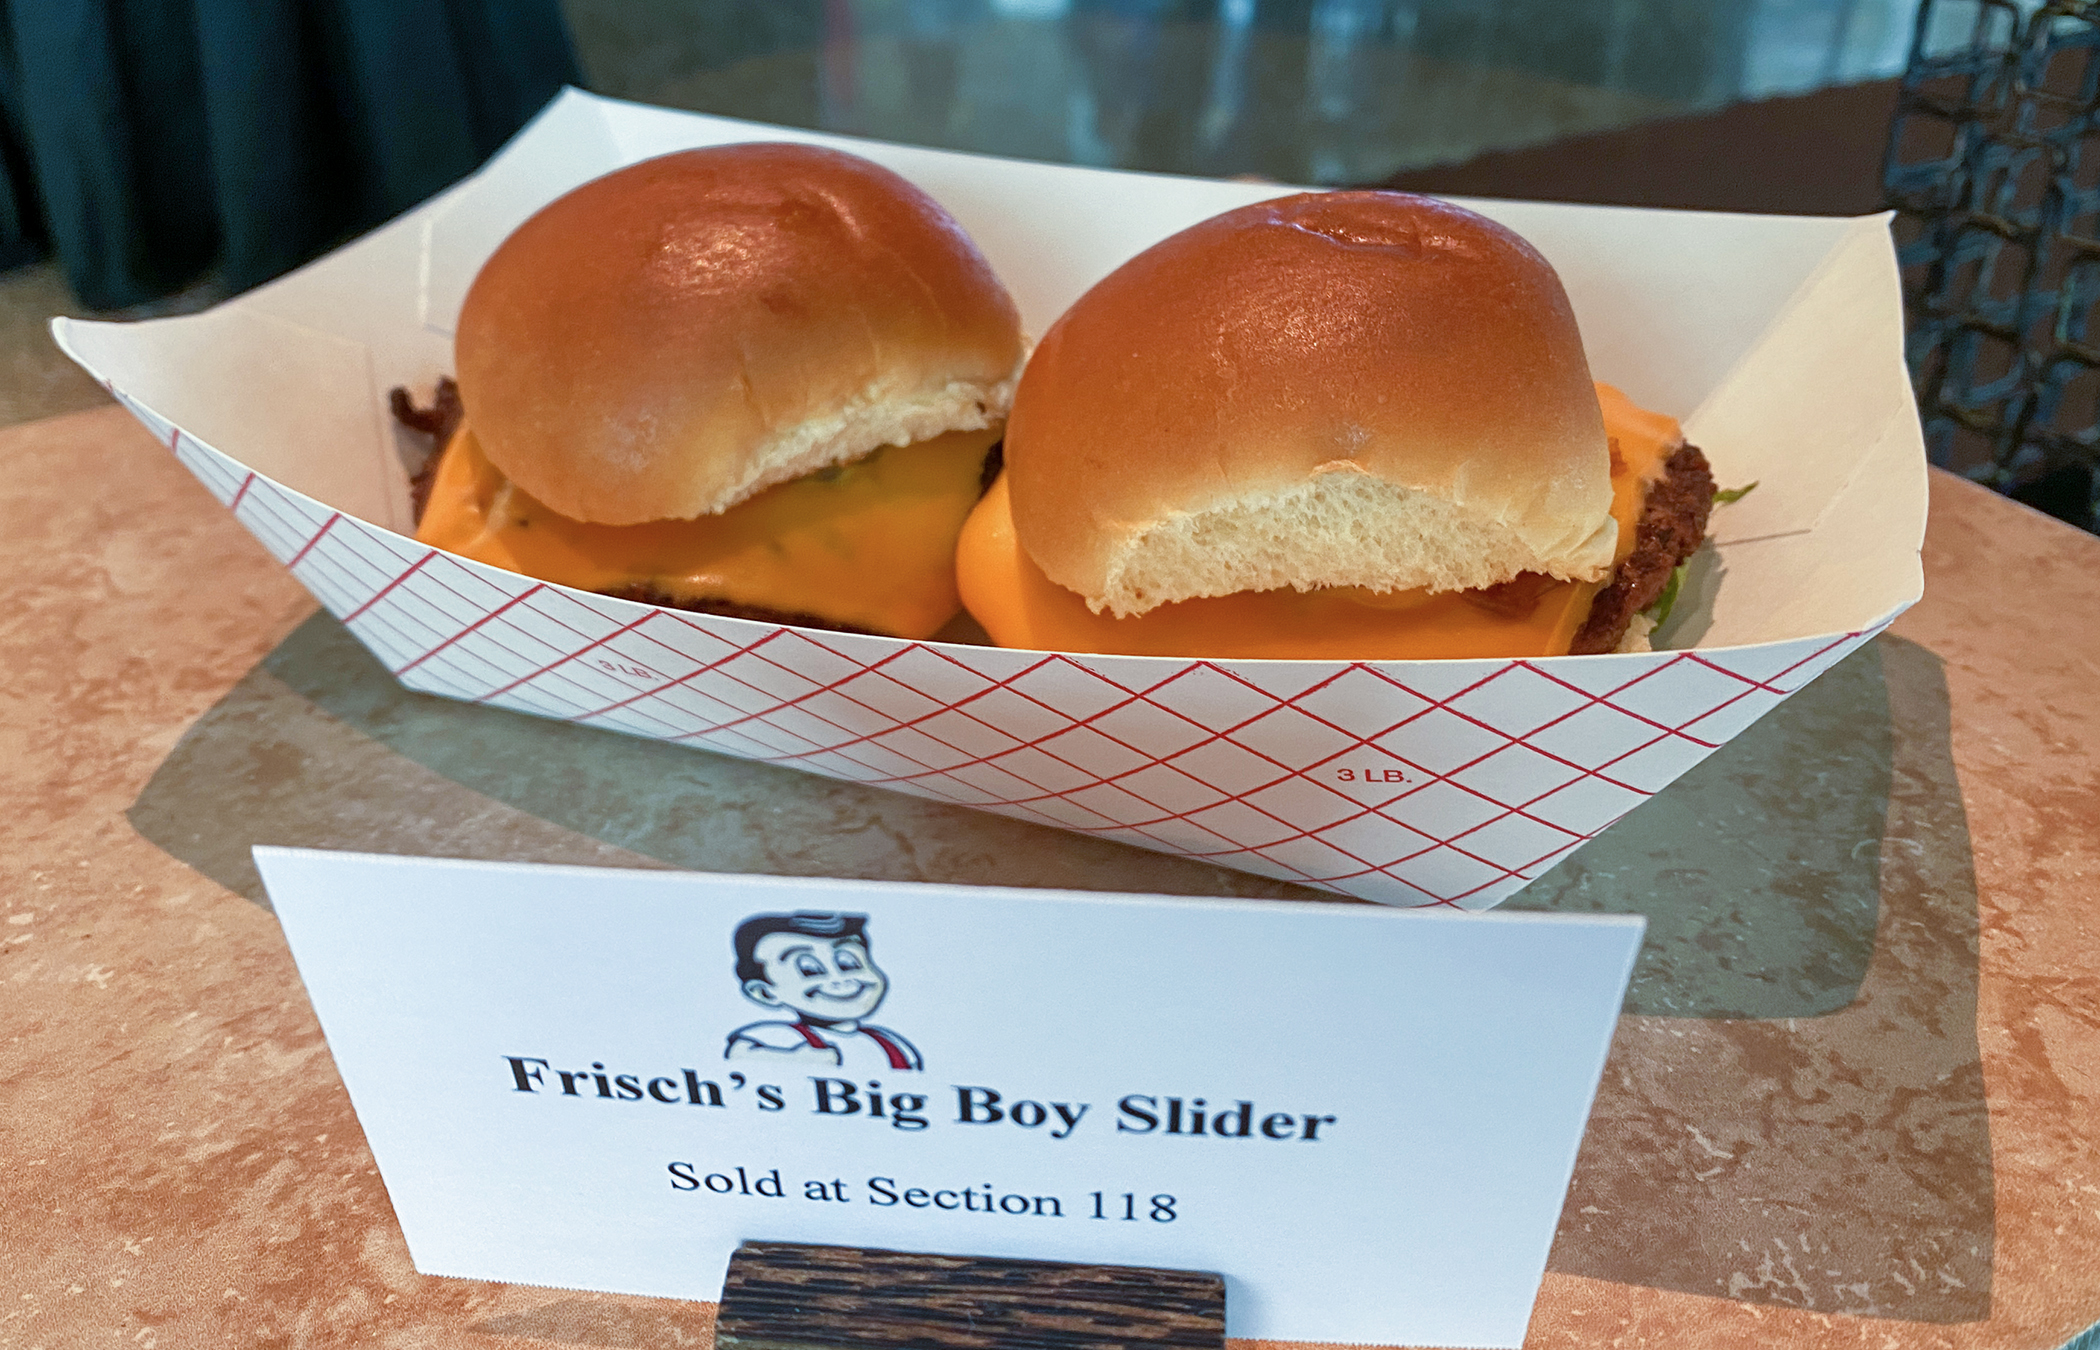 Eating Options at Great American Ball Park